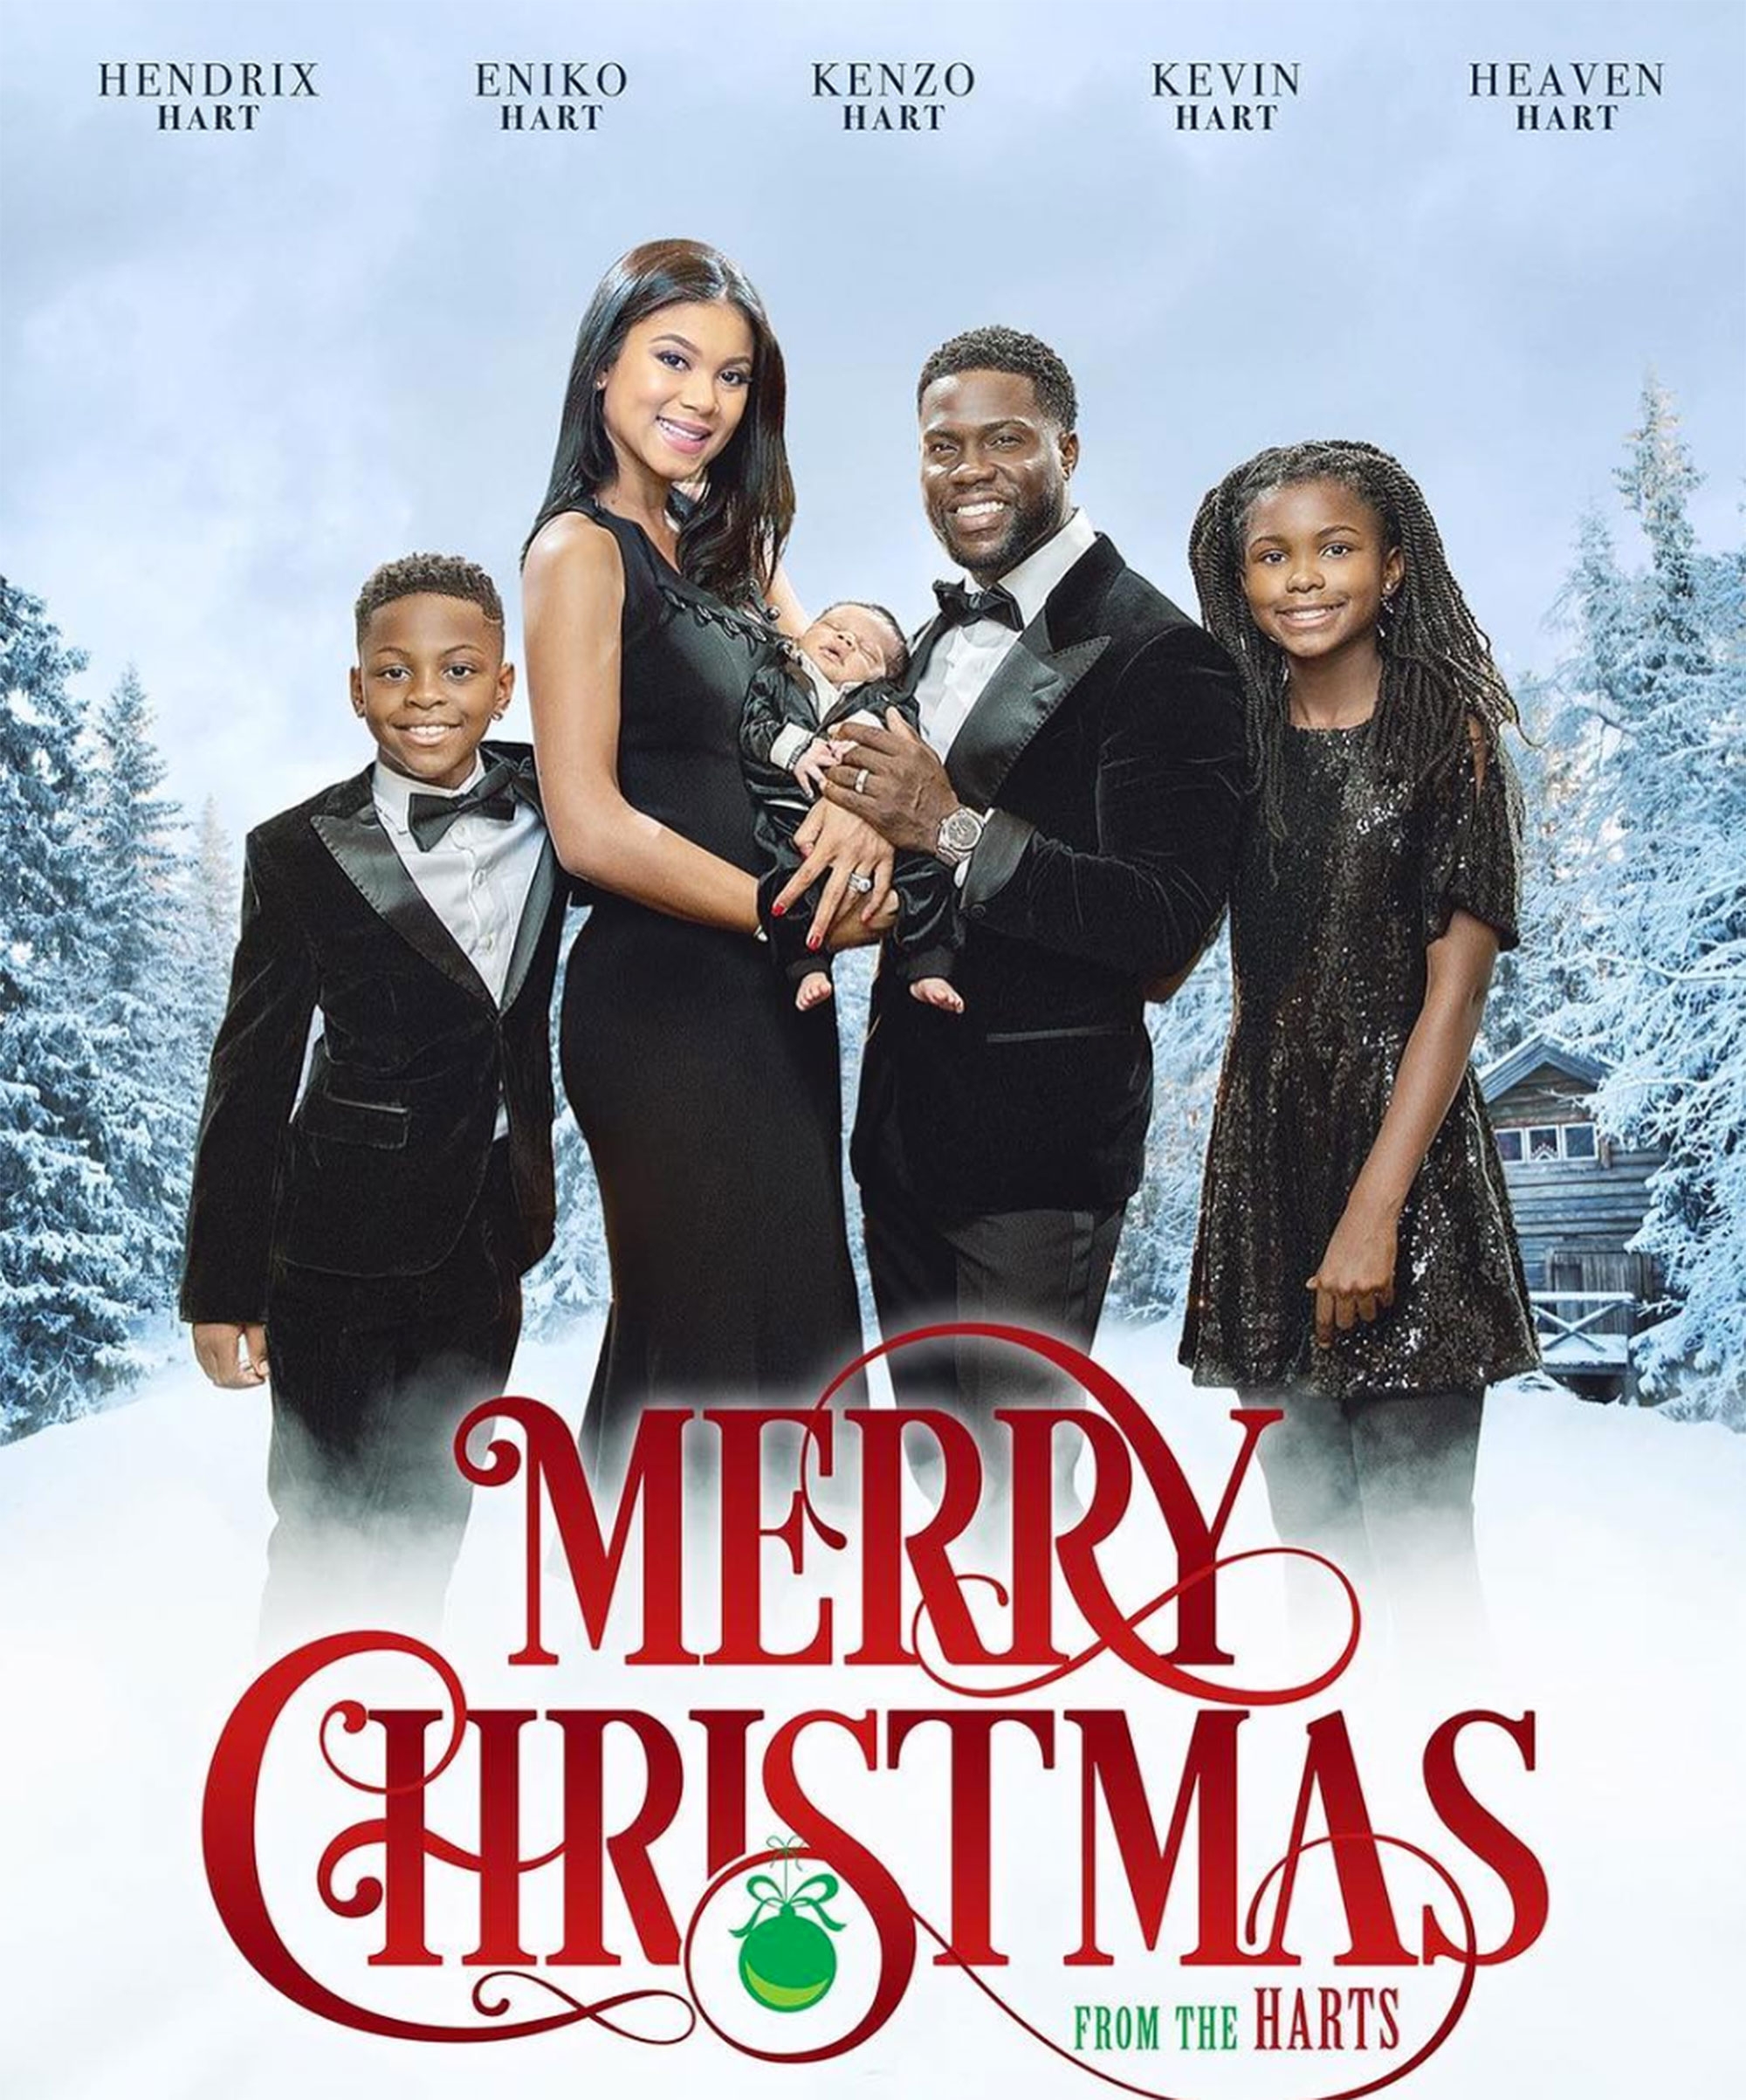 Kevin Hart and His Family Star in Their Very Own Movie Poster-Themed Christmas Card